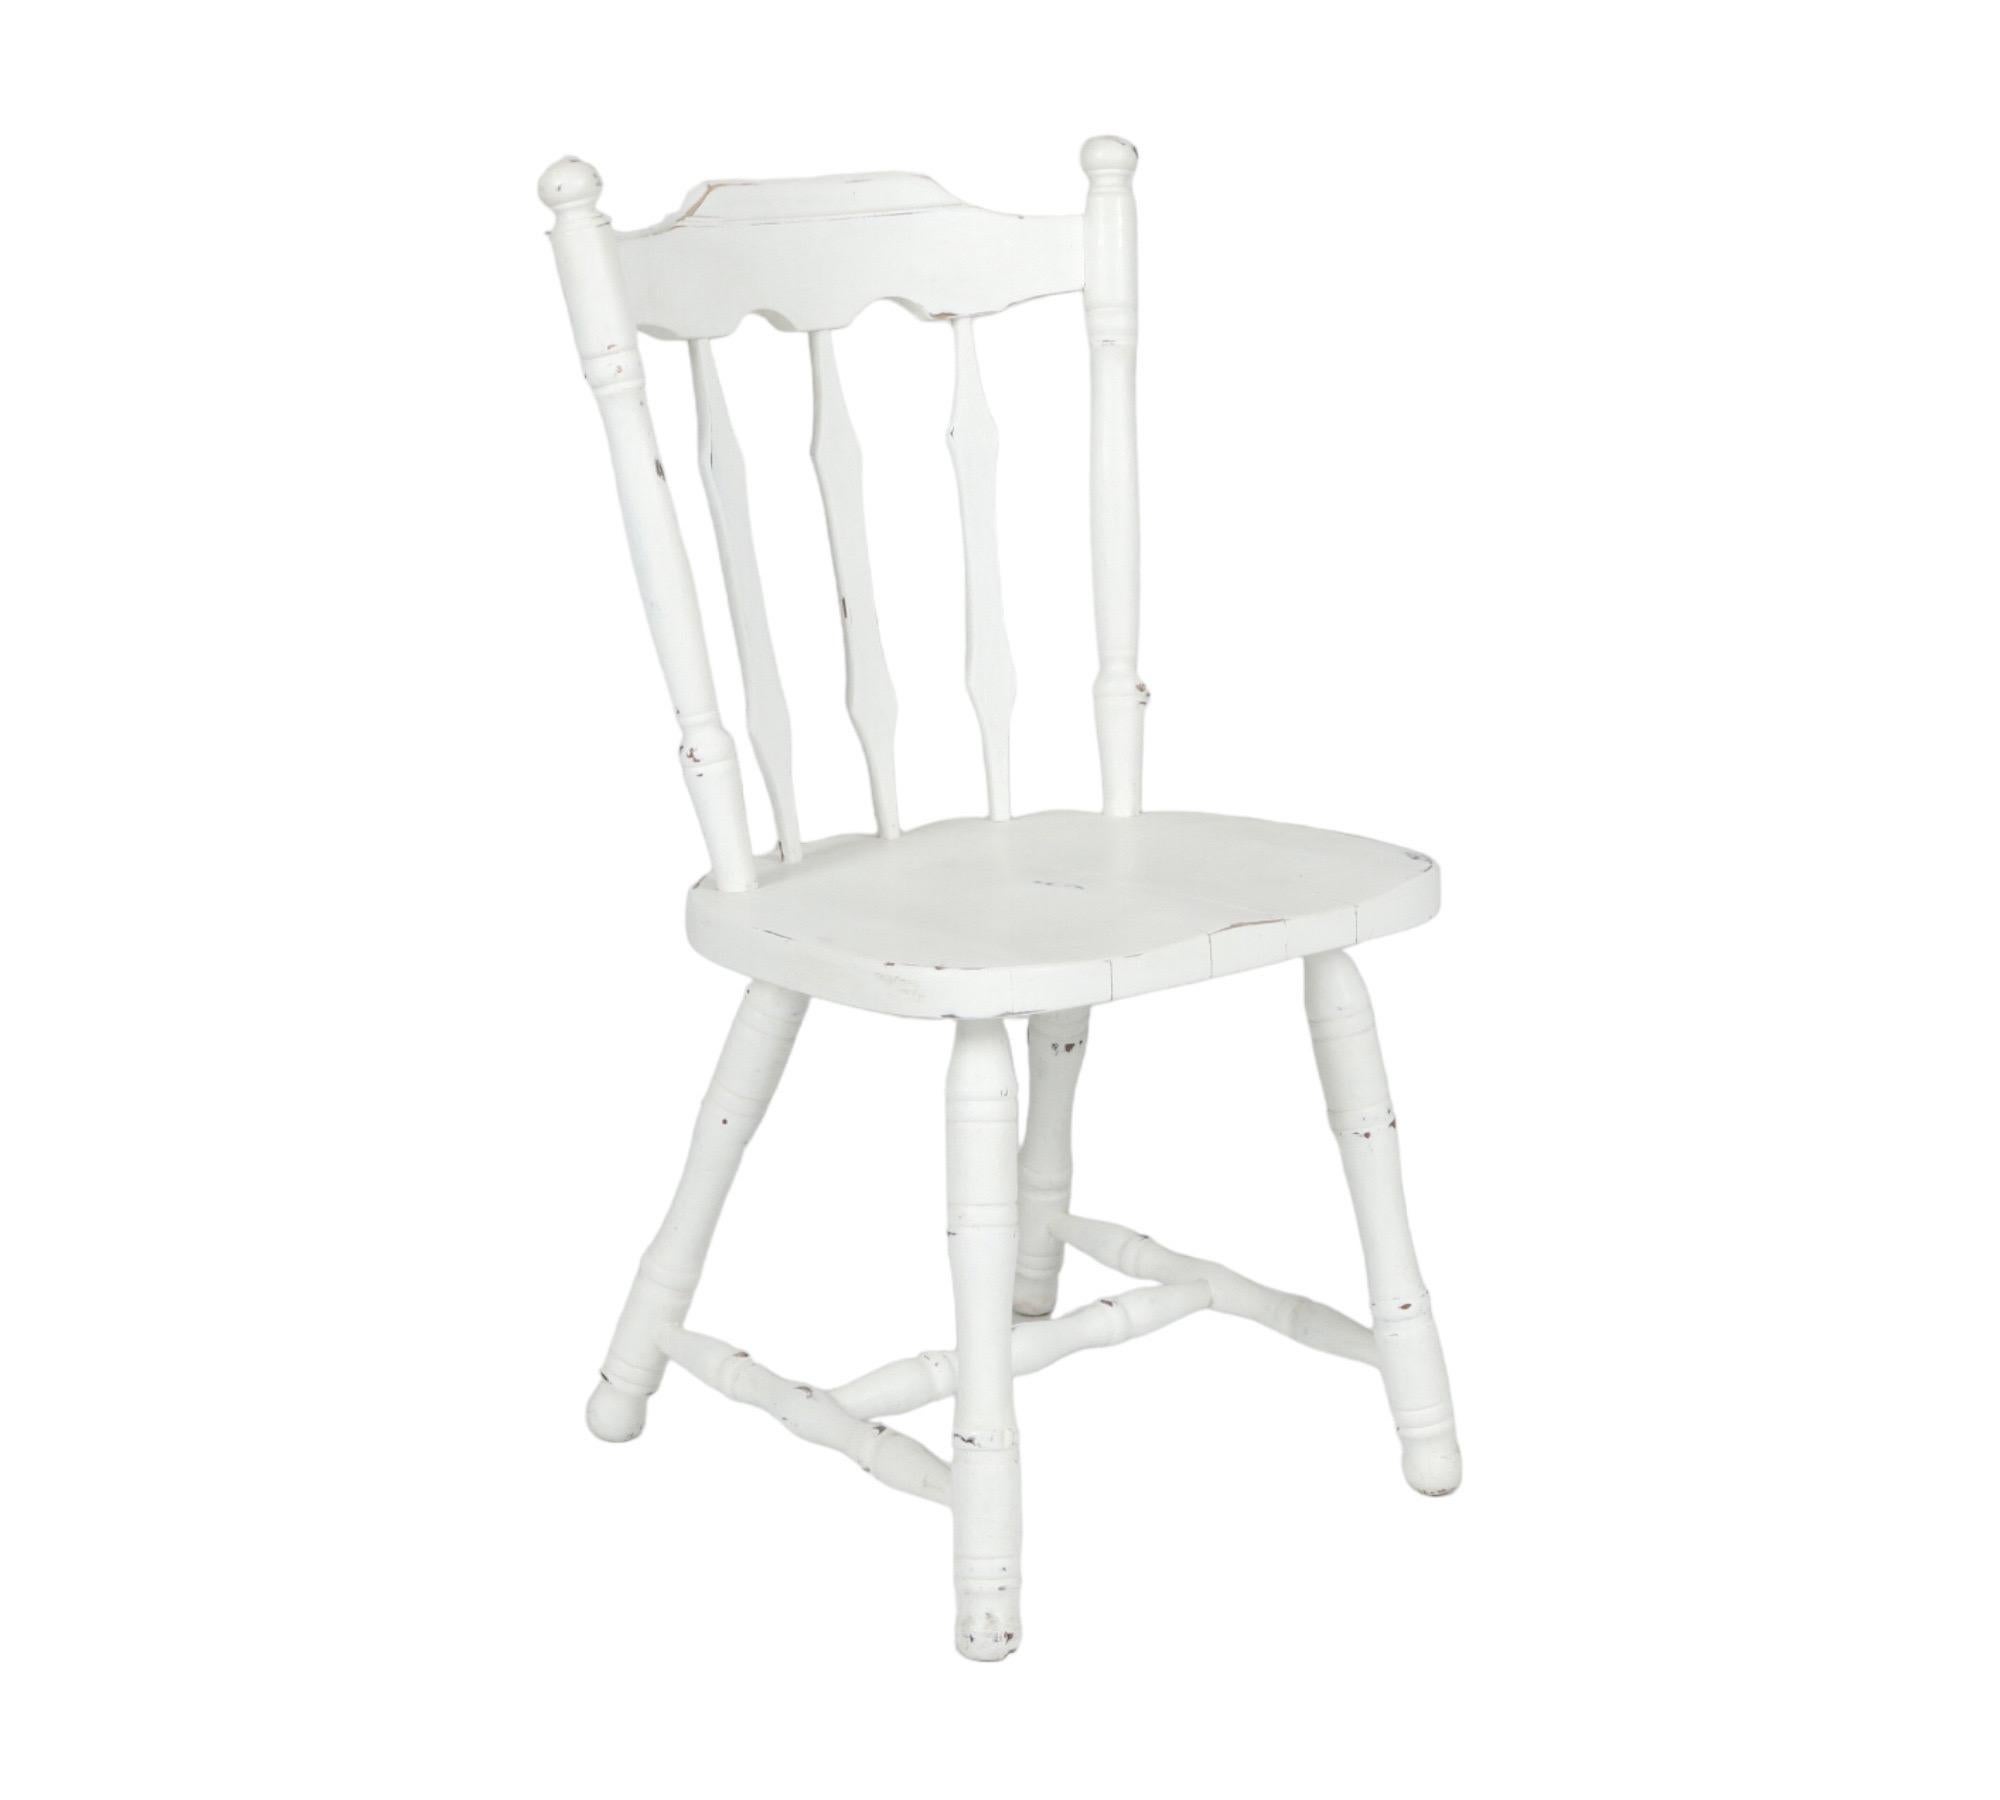 Rustic White Farmhouse Table with Four Chairs